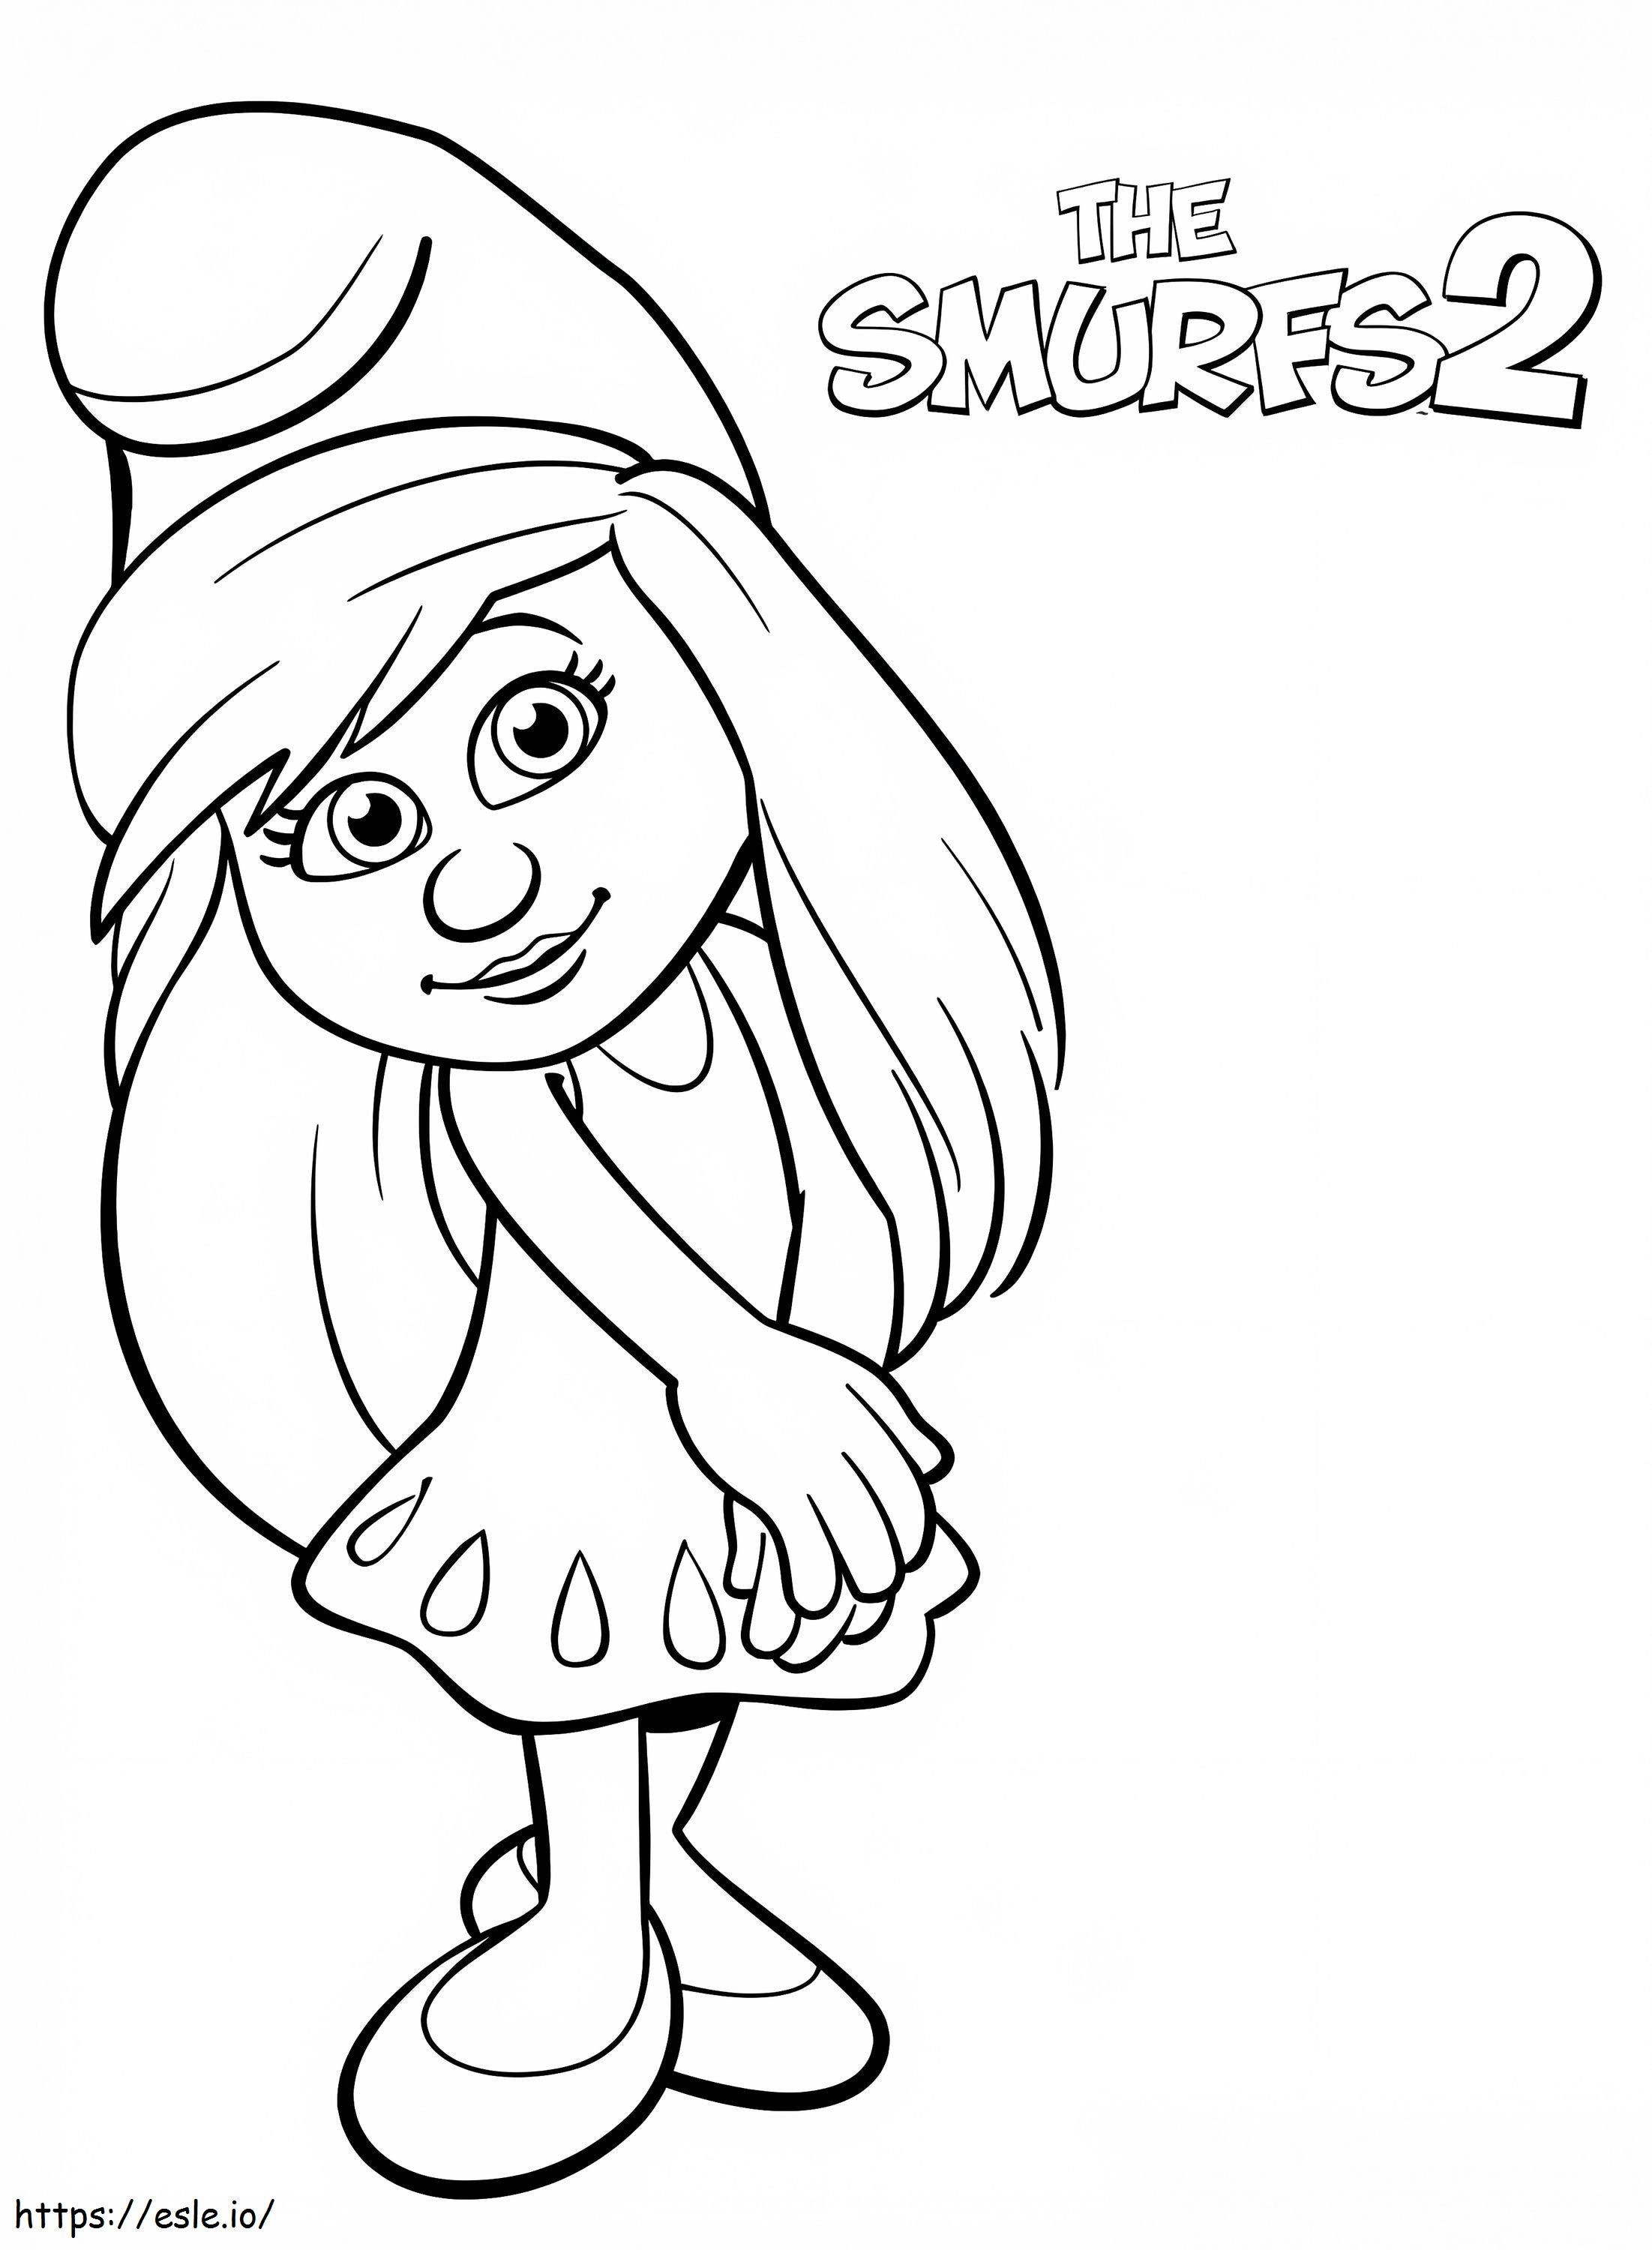 Lovely Smurfette 1 coloring page